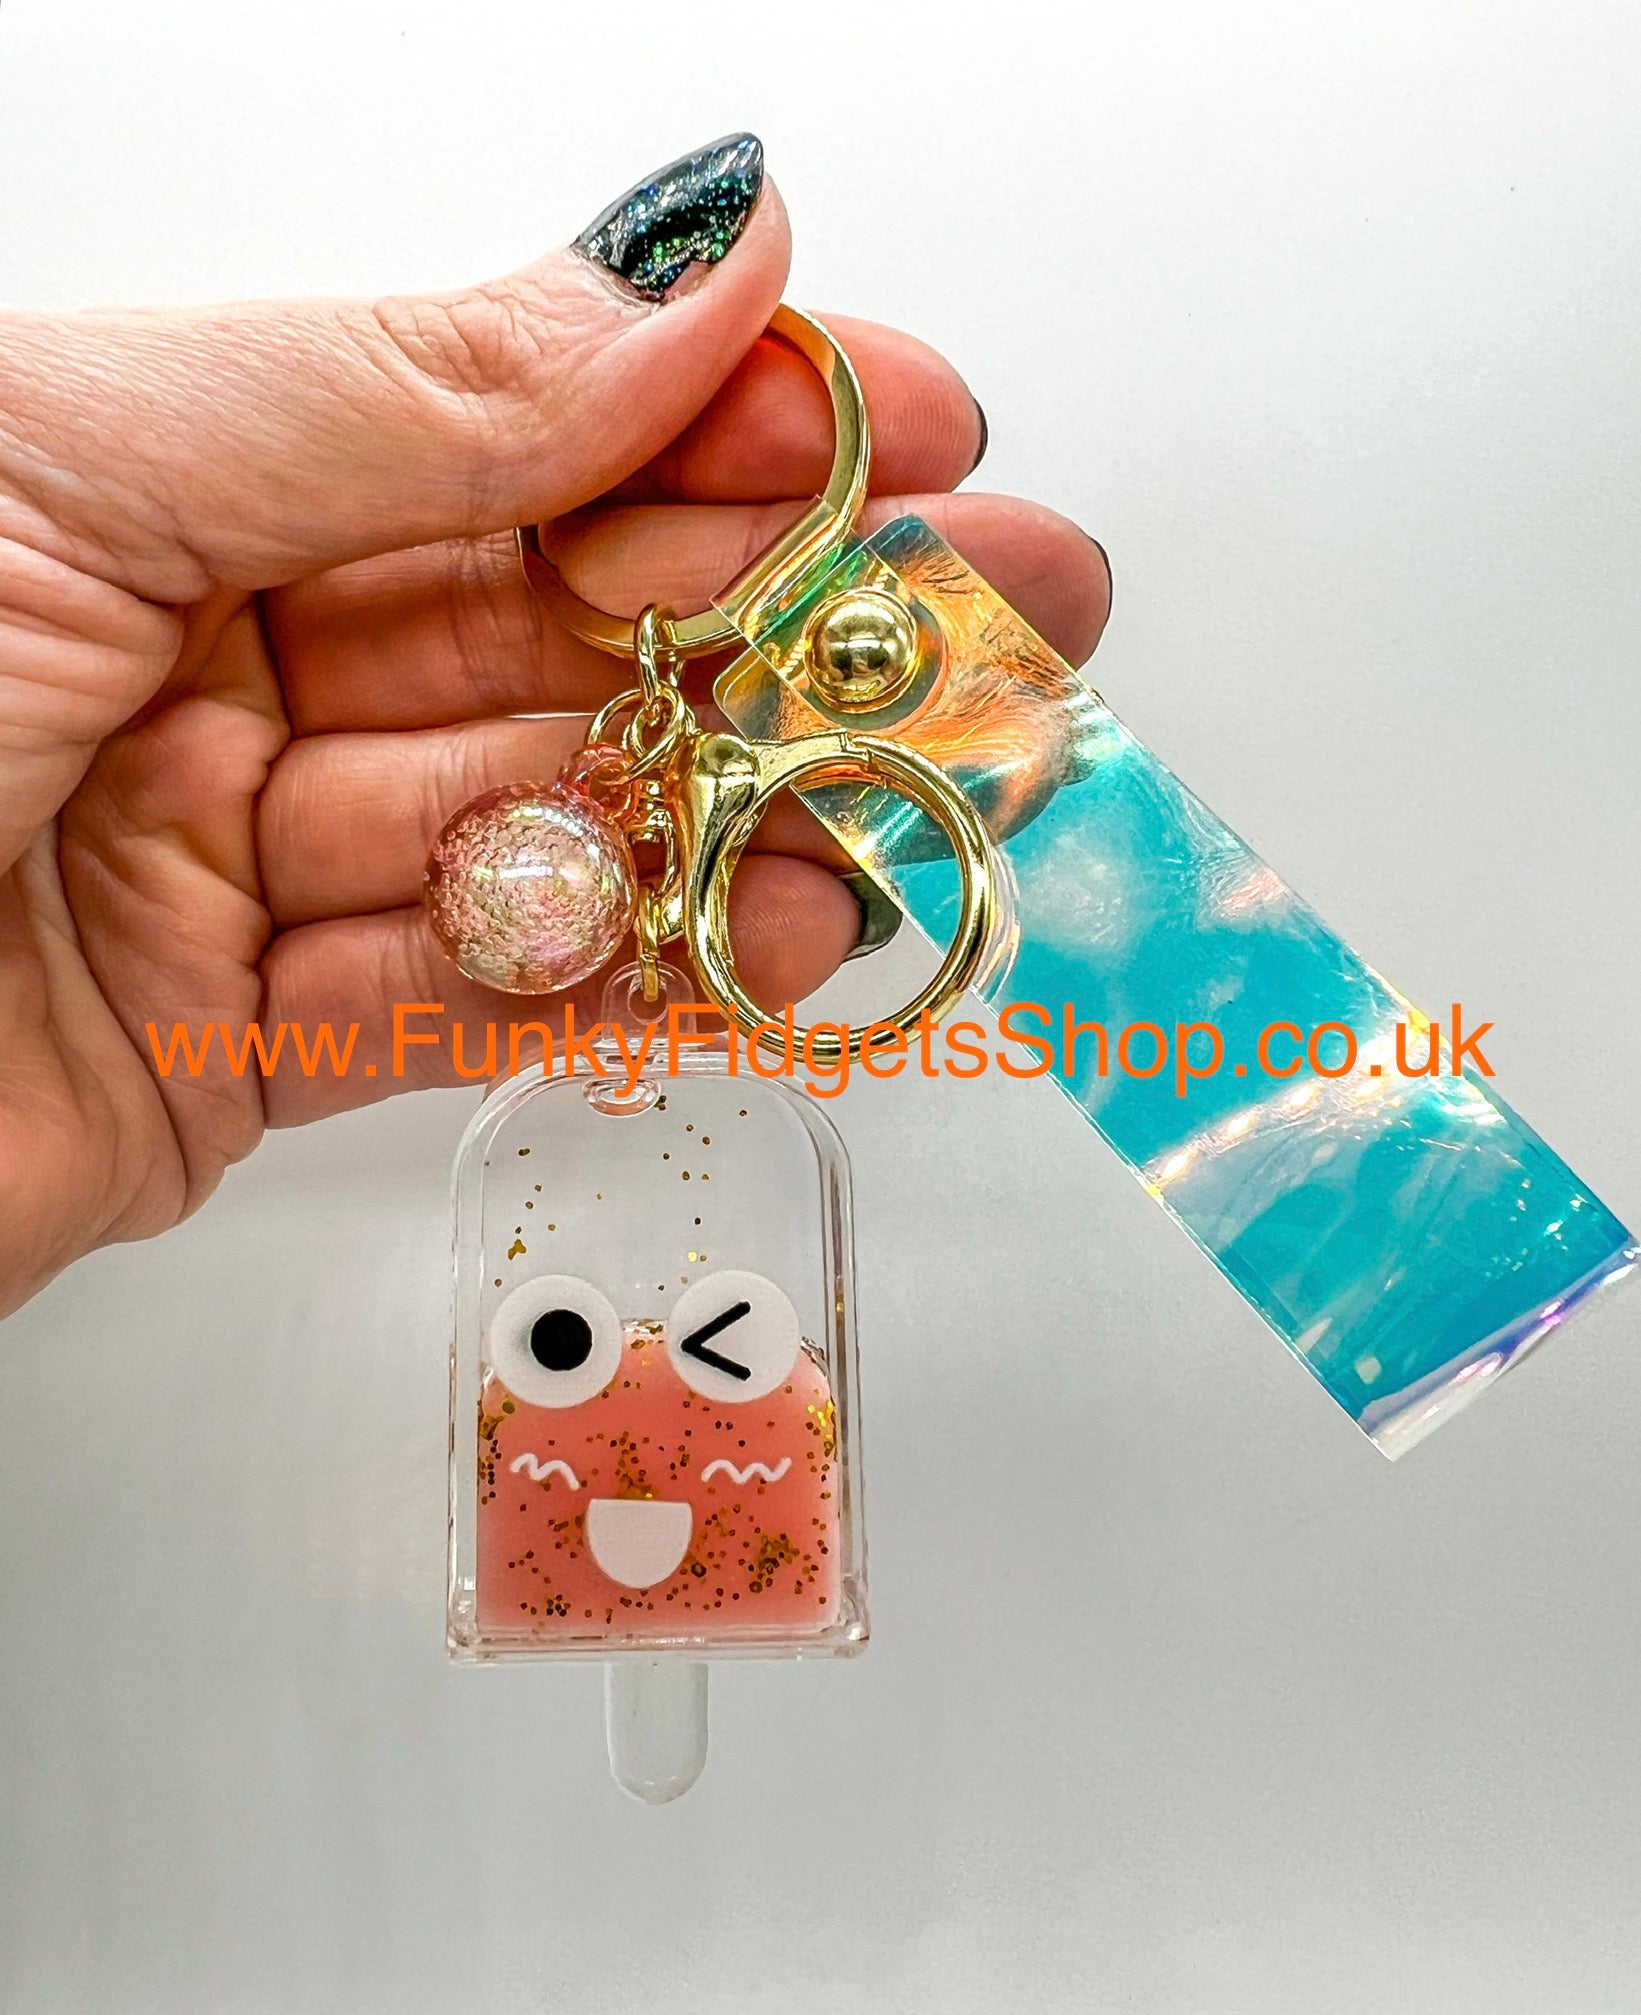 Crafting a Personalized DIY Keychain with Paper Collage and Resin